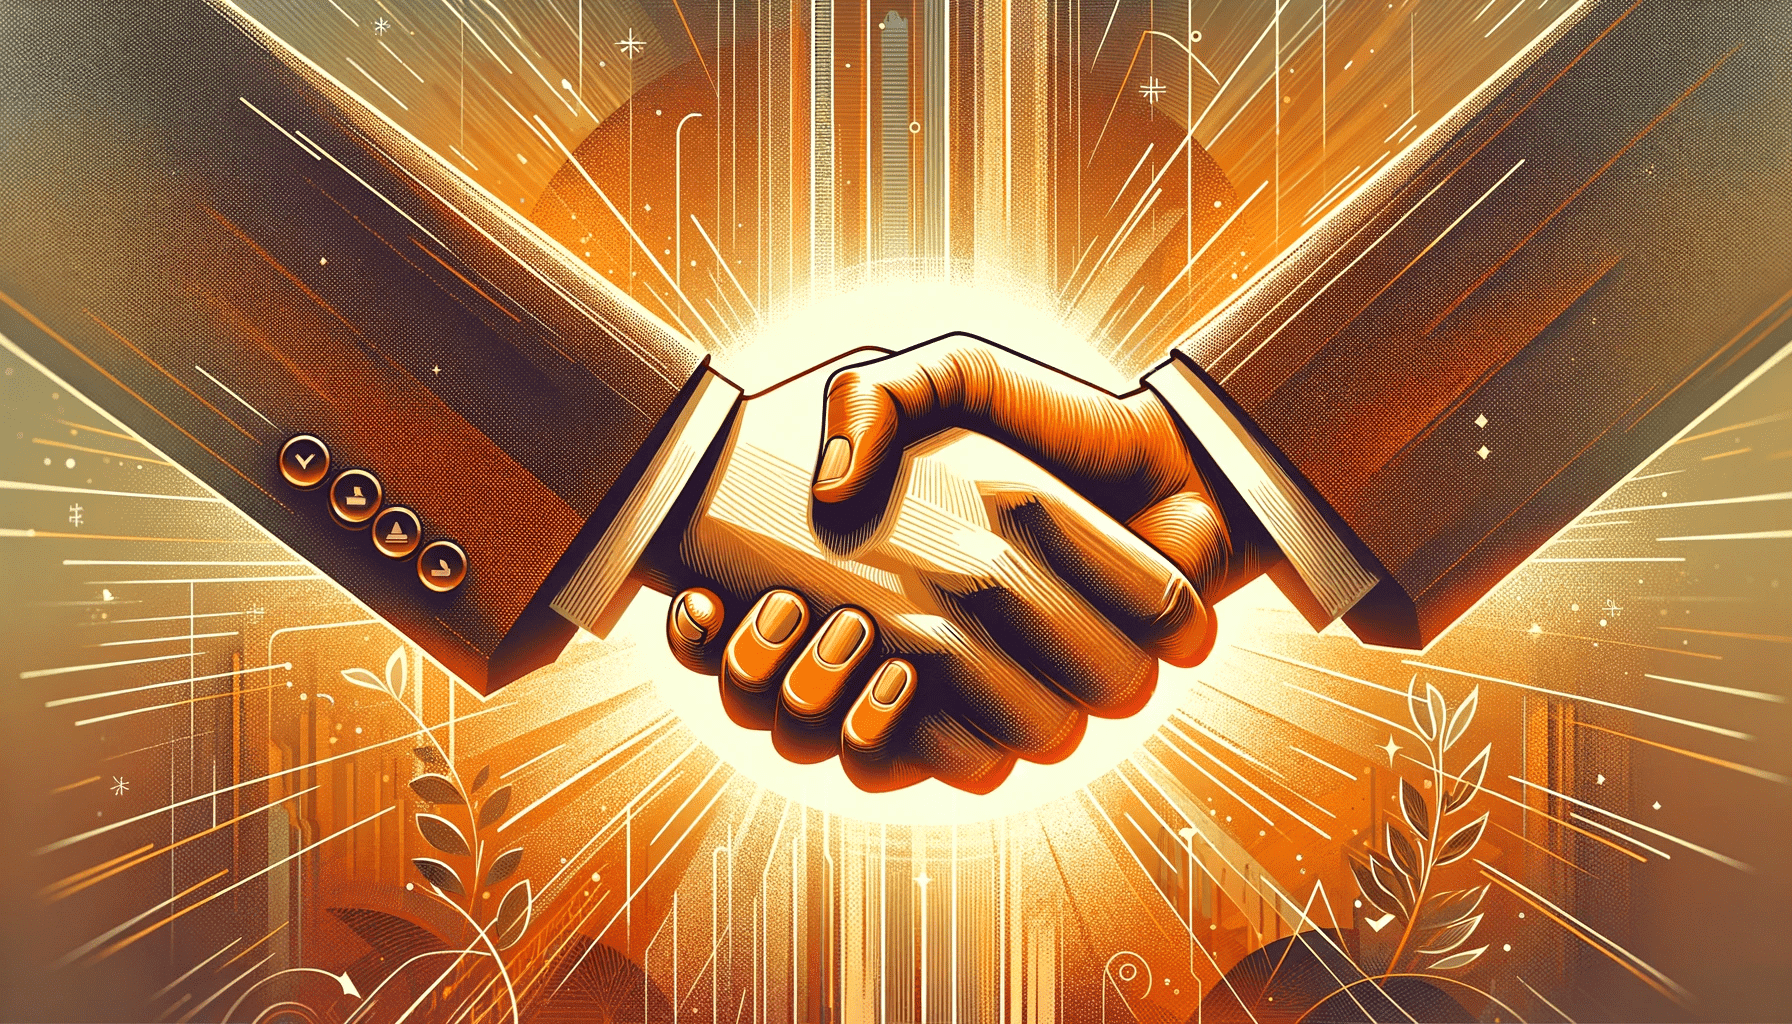 Two stylized hands in a firm handshake against a radiant, energetic backdrop symbolizing a powerful agreement or partnership.